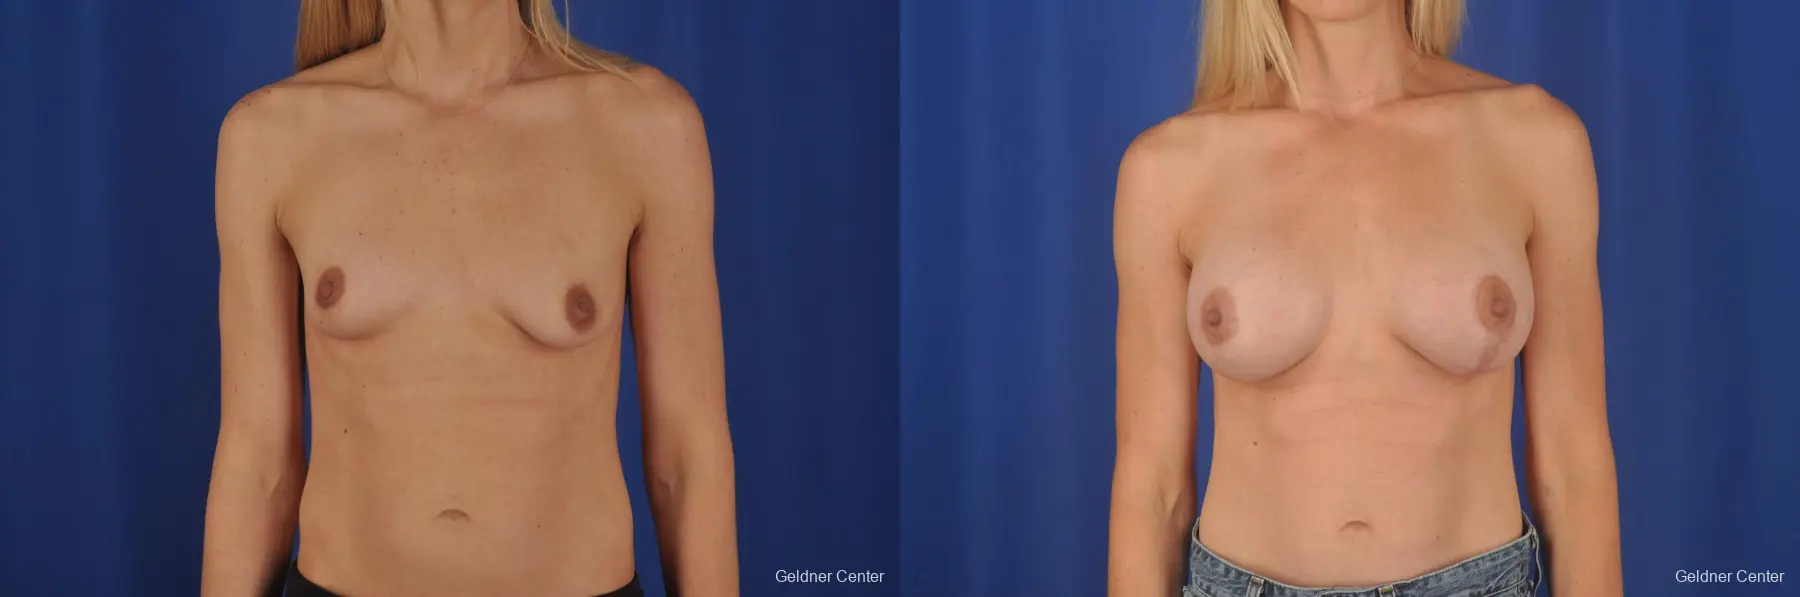 Breast Lift Lake Shore Dr, Chicago 6654 - Before and After 1